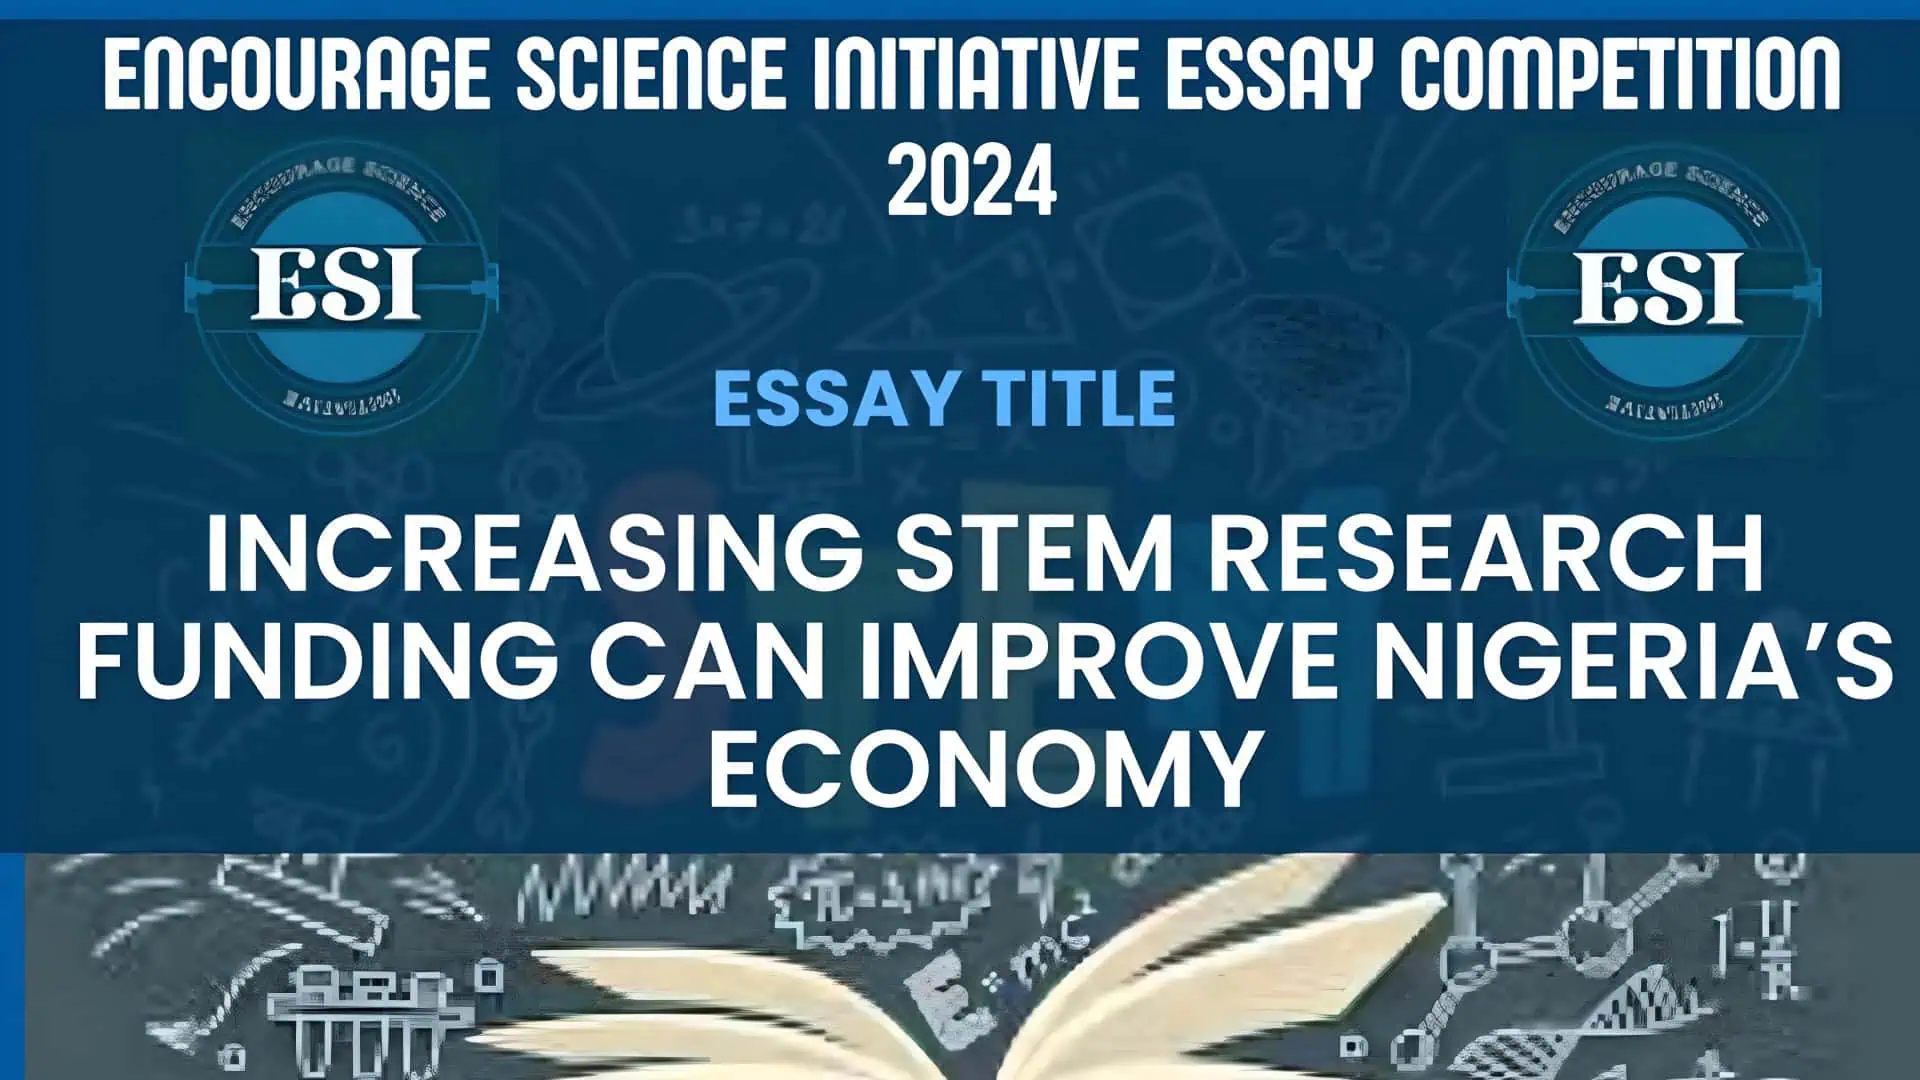 Encourage Science Initiative Essay Competition